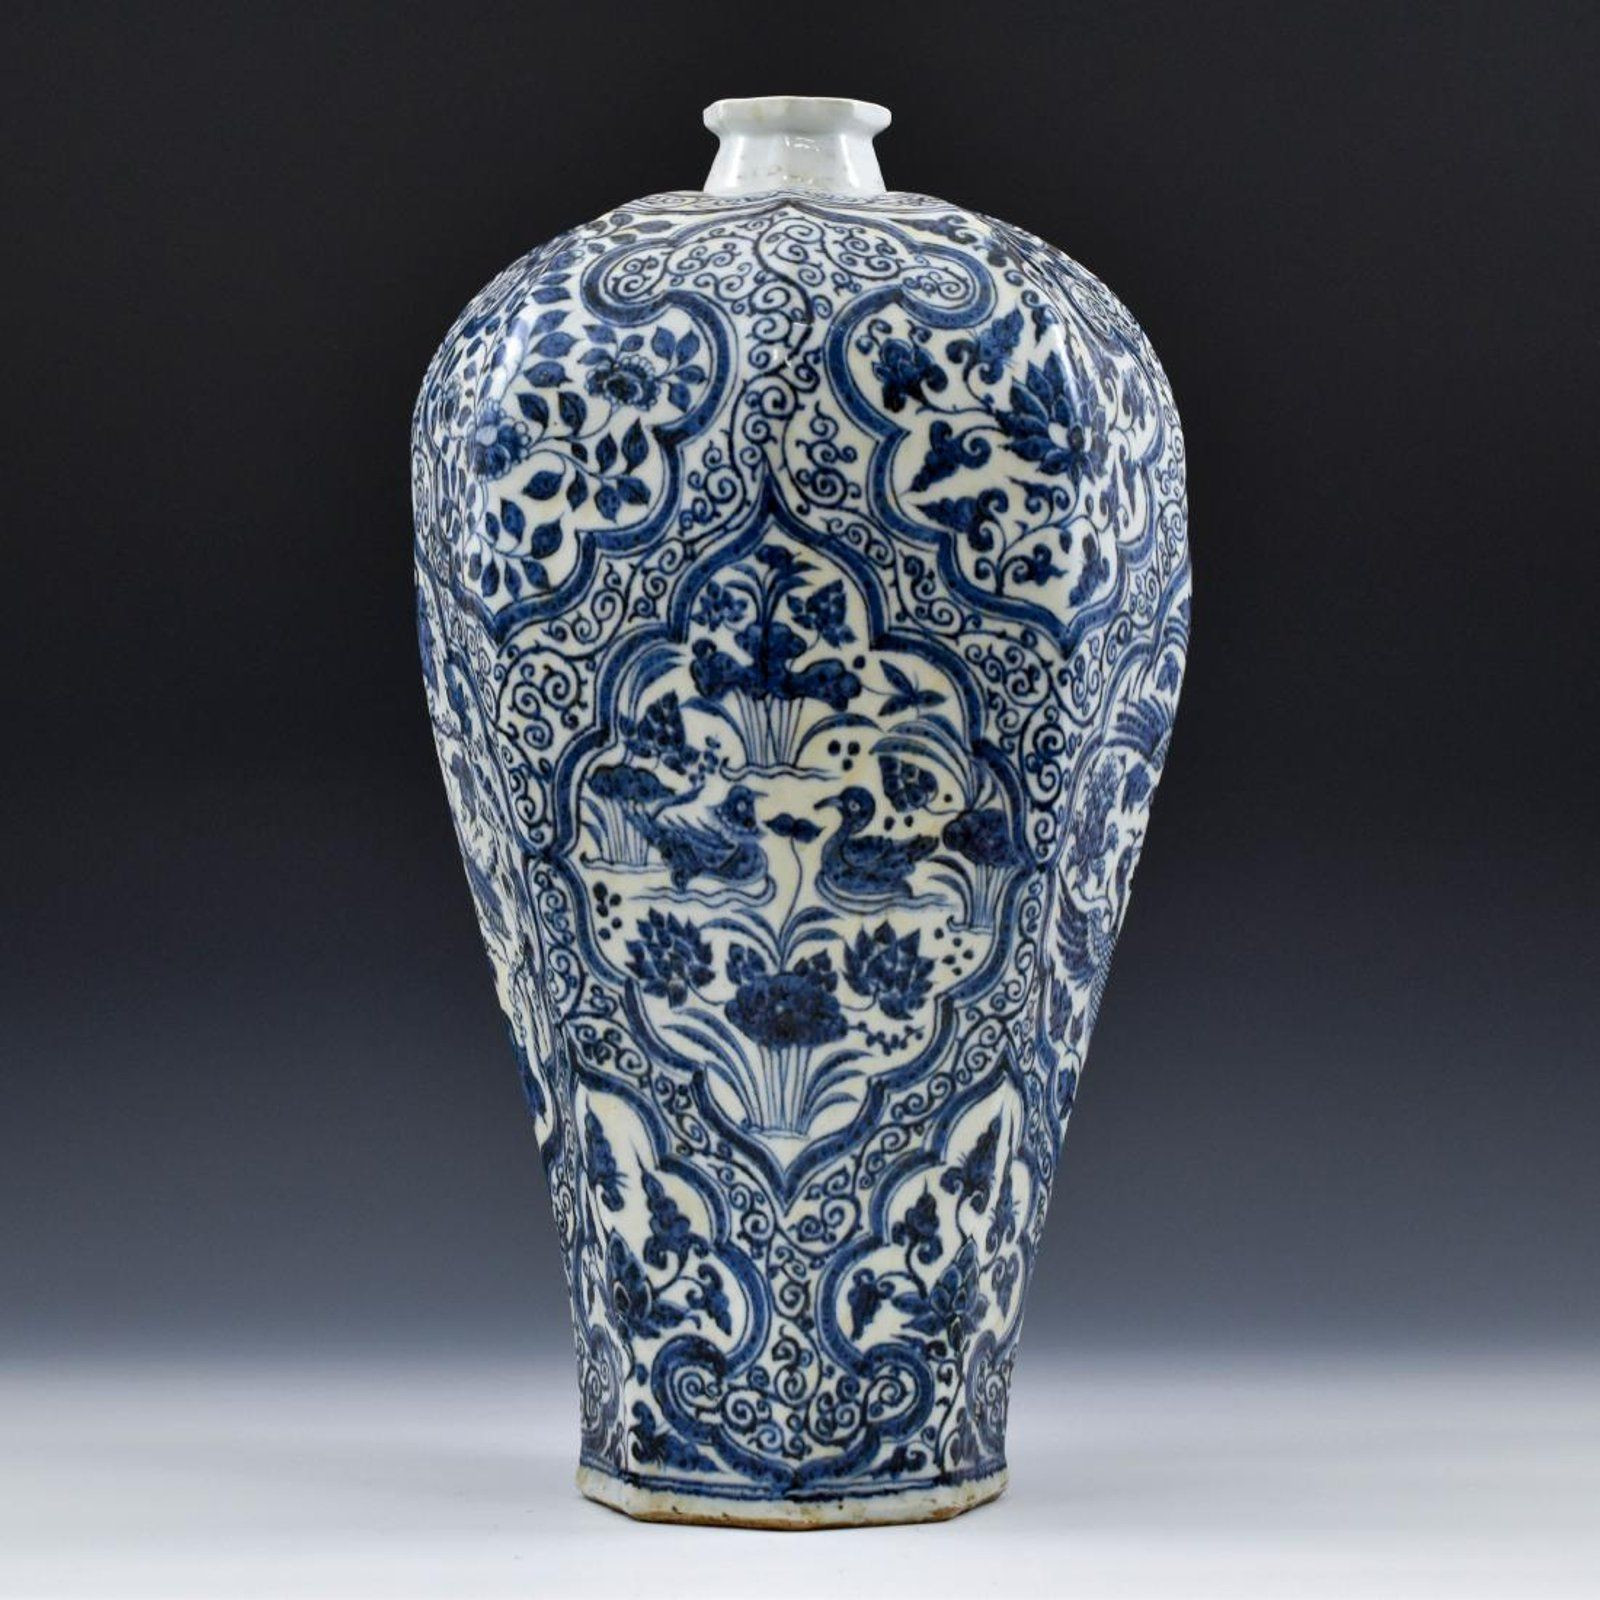 11 Fantastic Ancient Chinese Porcelain Vase 2024 free download ancient chinese porcelain vase of ming dynasty blue and white octagonal meiping vase on blue and inside ming dynasty blue and white octagonal meiping vase